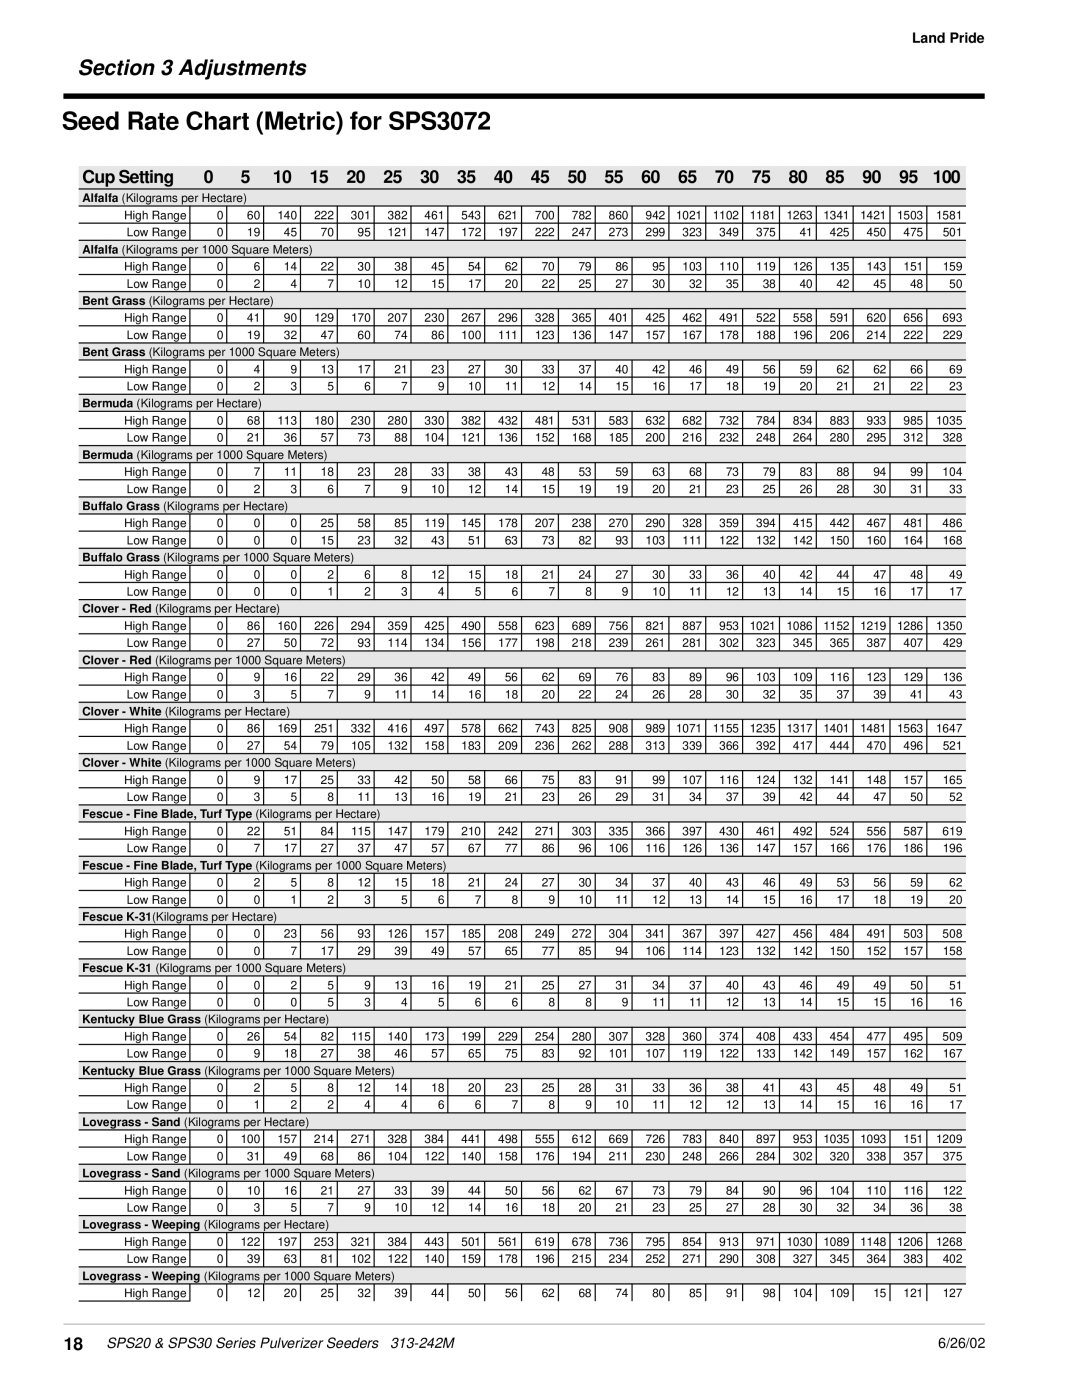 Land Pride SPS20 manual Seed Rate Chart Metric for SPS3072, Adjustments, Cup Setting, Land Pride, 6/26/02 